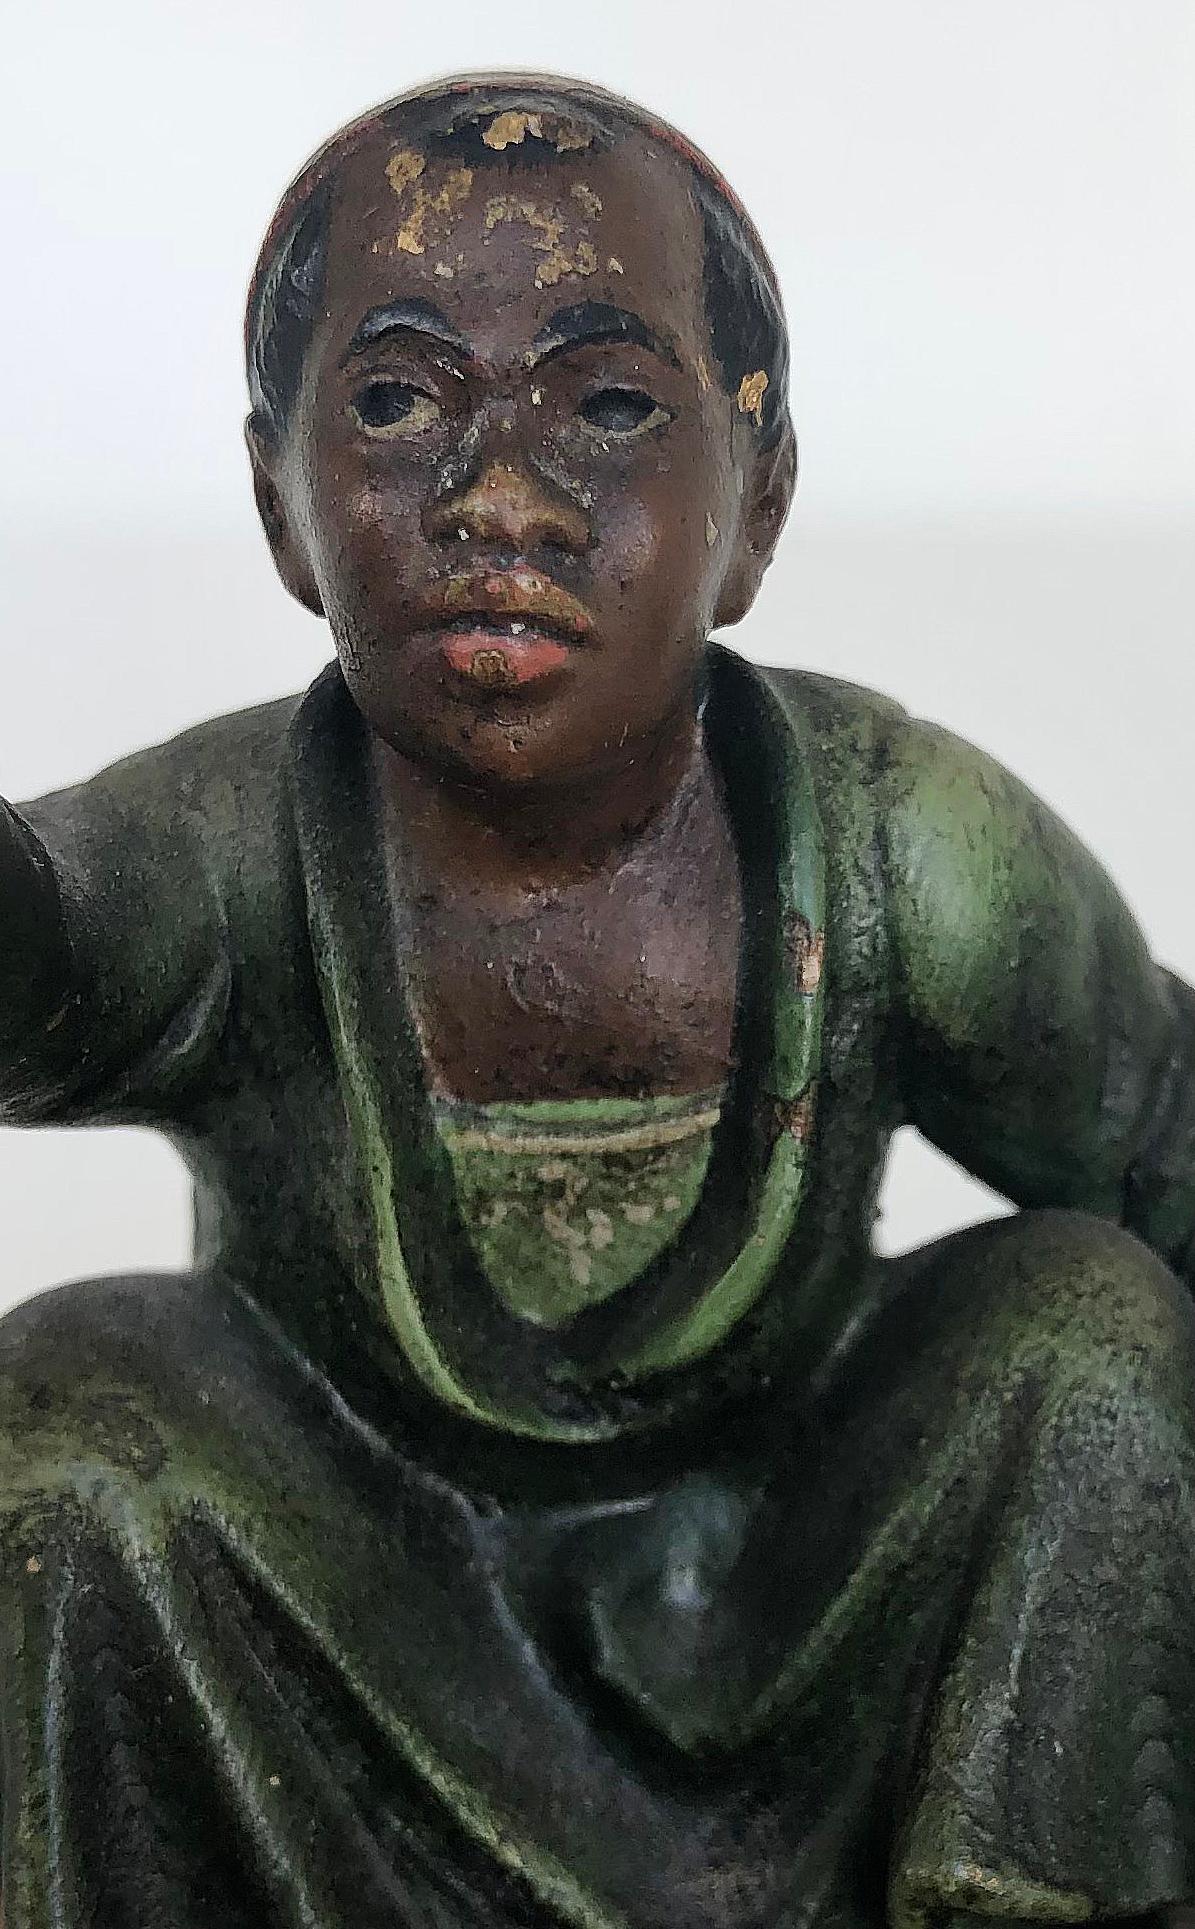 Austrian orientalist cold-painted bronze merchant figurine


Offered for sale is an early 20th century Austrian cold-painted bronze with an Orientalist merchant figure. The bronze shows age and has some paint losses.